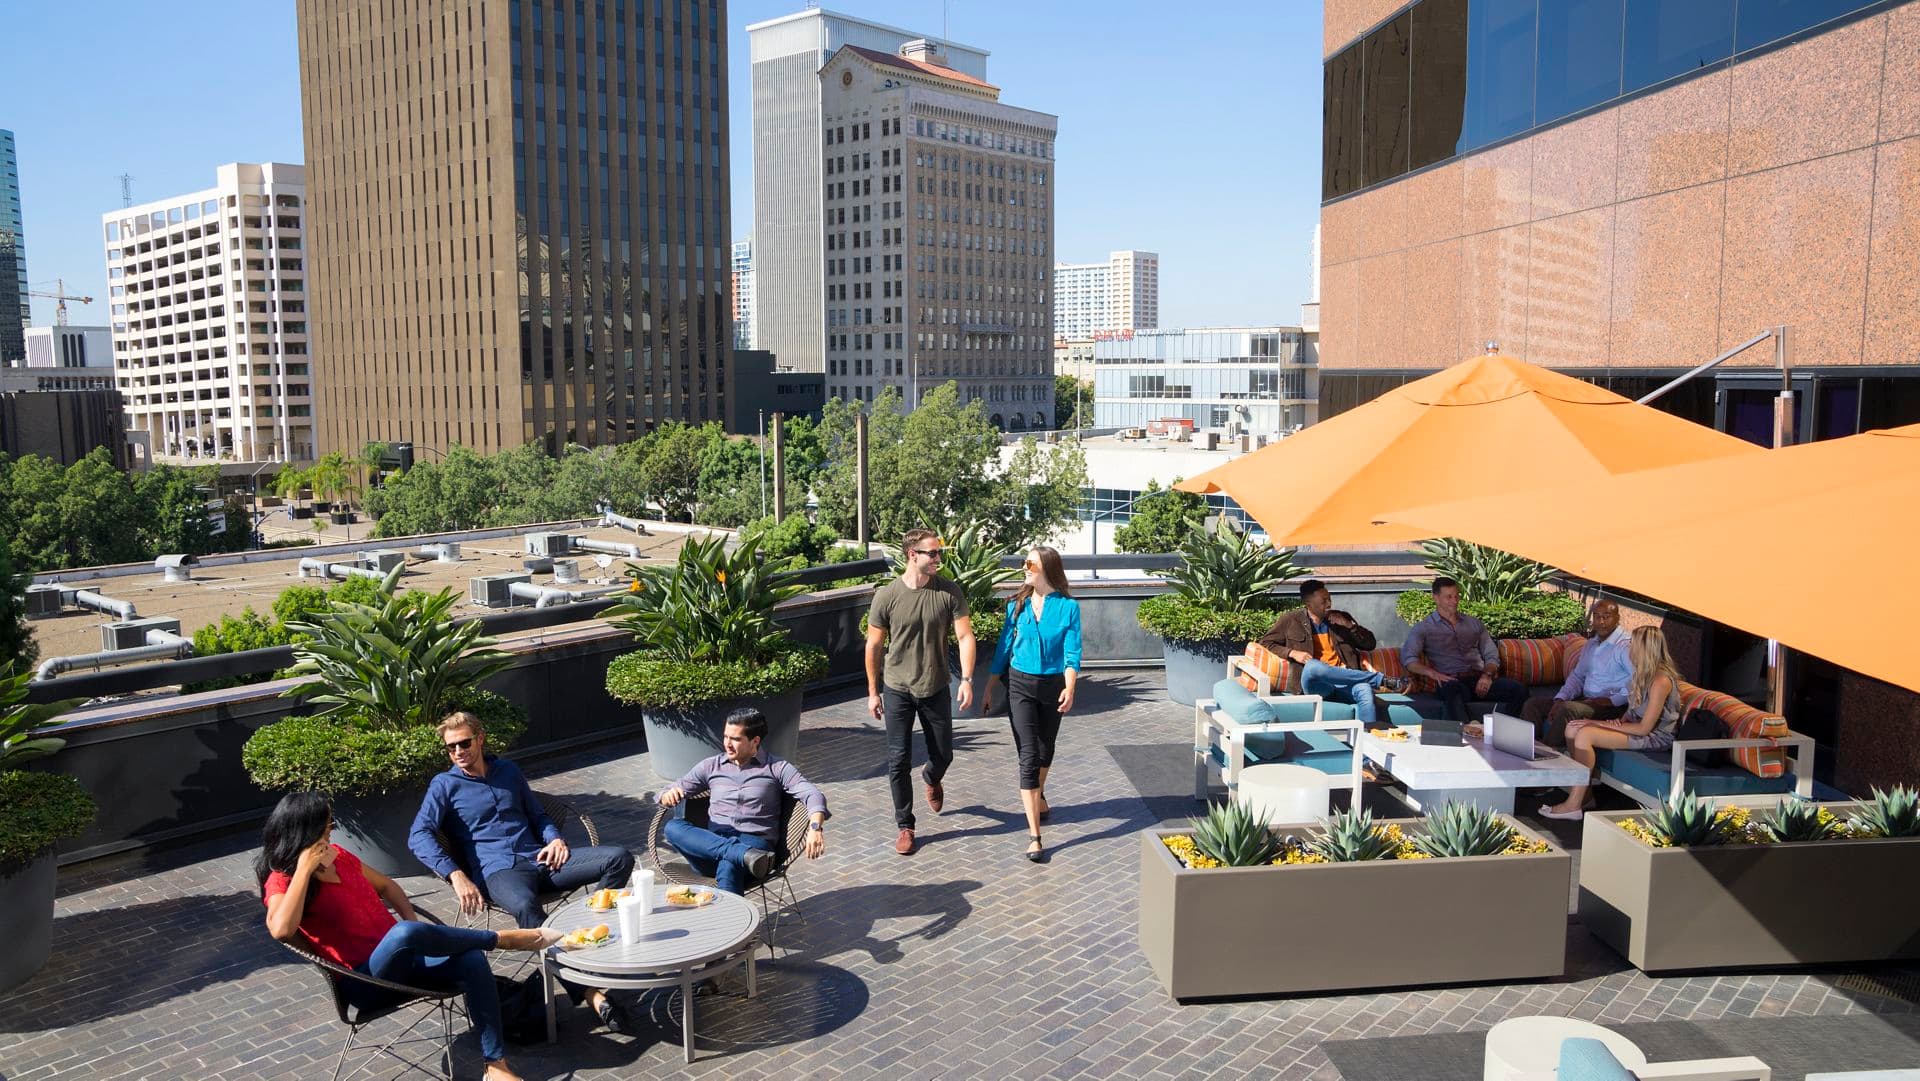 View of The Commons Outdoor Workspace at Wells Fargo Plaza in San Diego, CA.